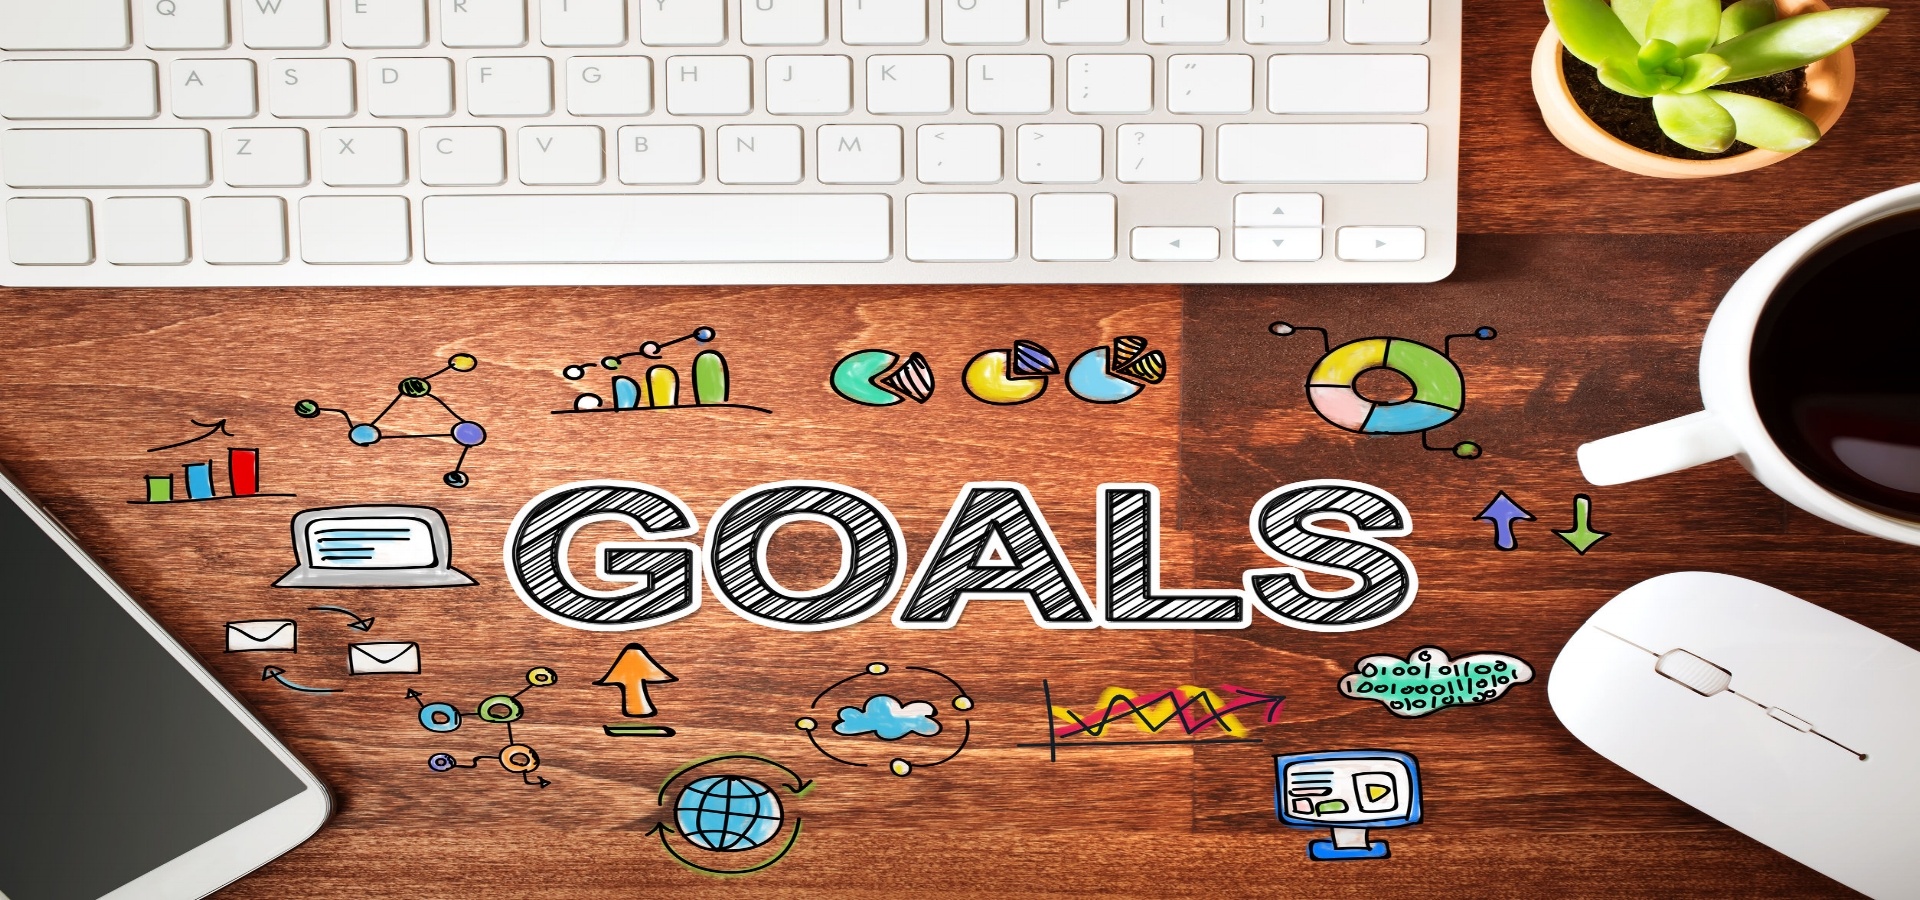 Computer keyboard with the word "Goals" illustrated on a wood table